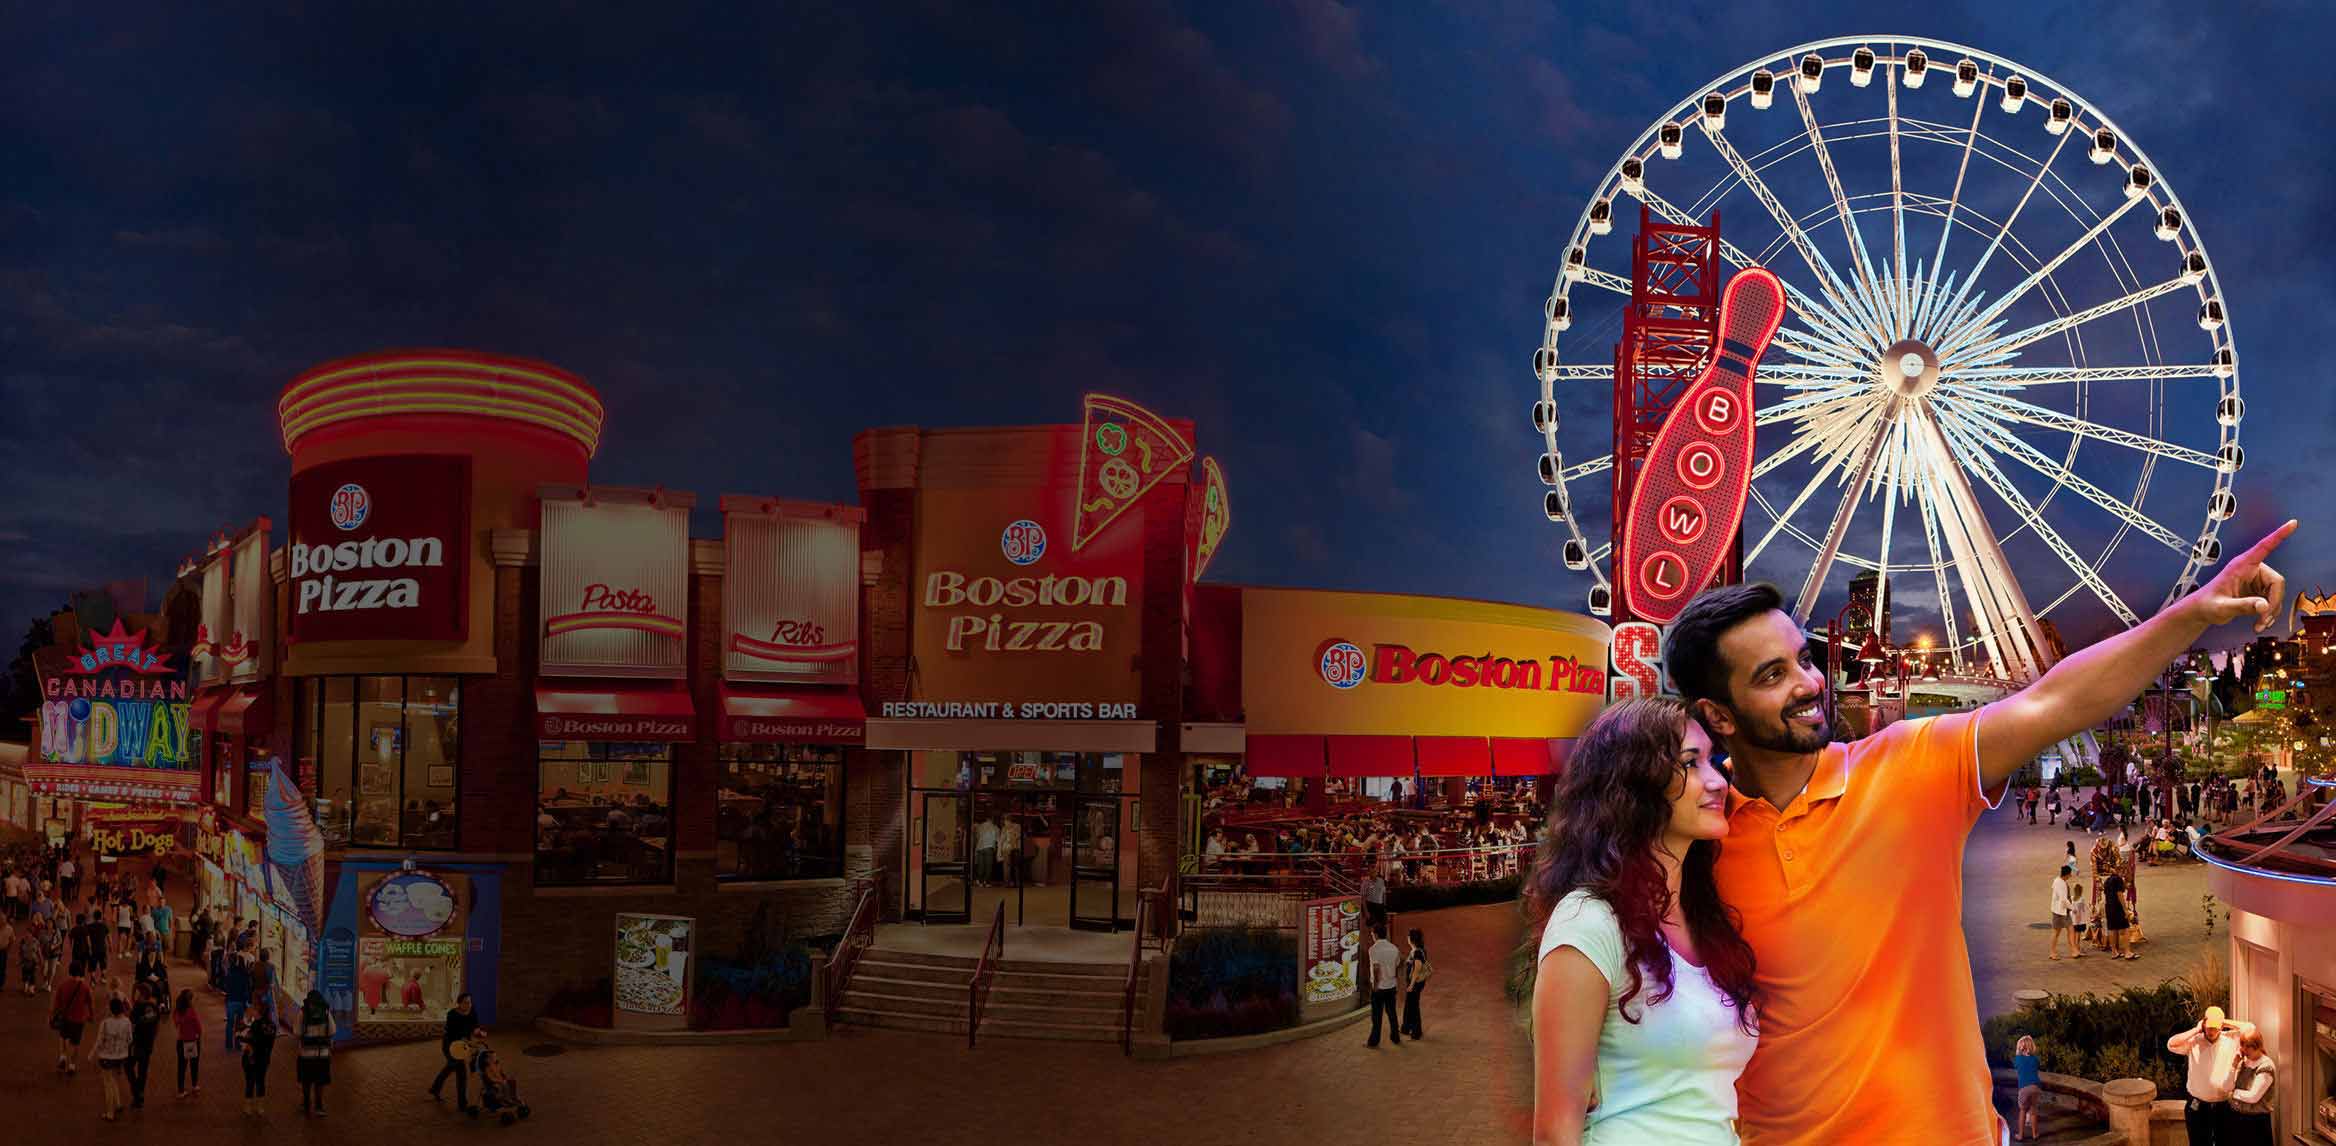 For visitors who want to enjoy all that Niagara Falls has to offer, come to Clifton Hill's world famous Street of Fun by the Falls and enjoy an unforgetable experience like no other!